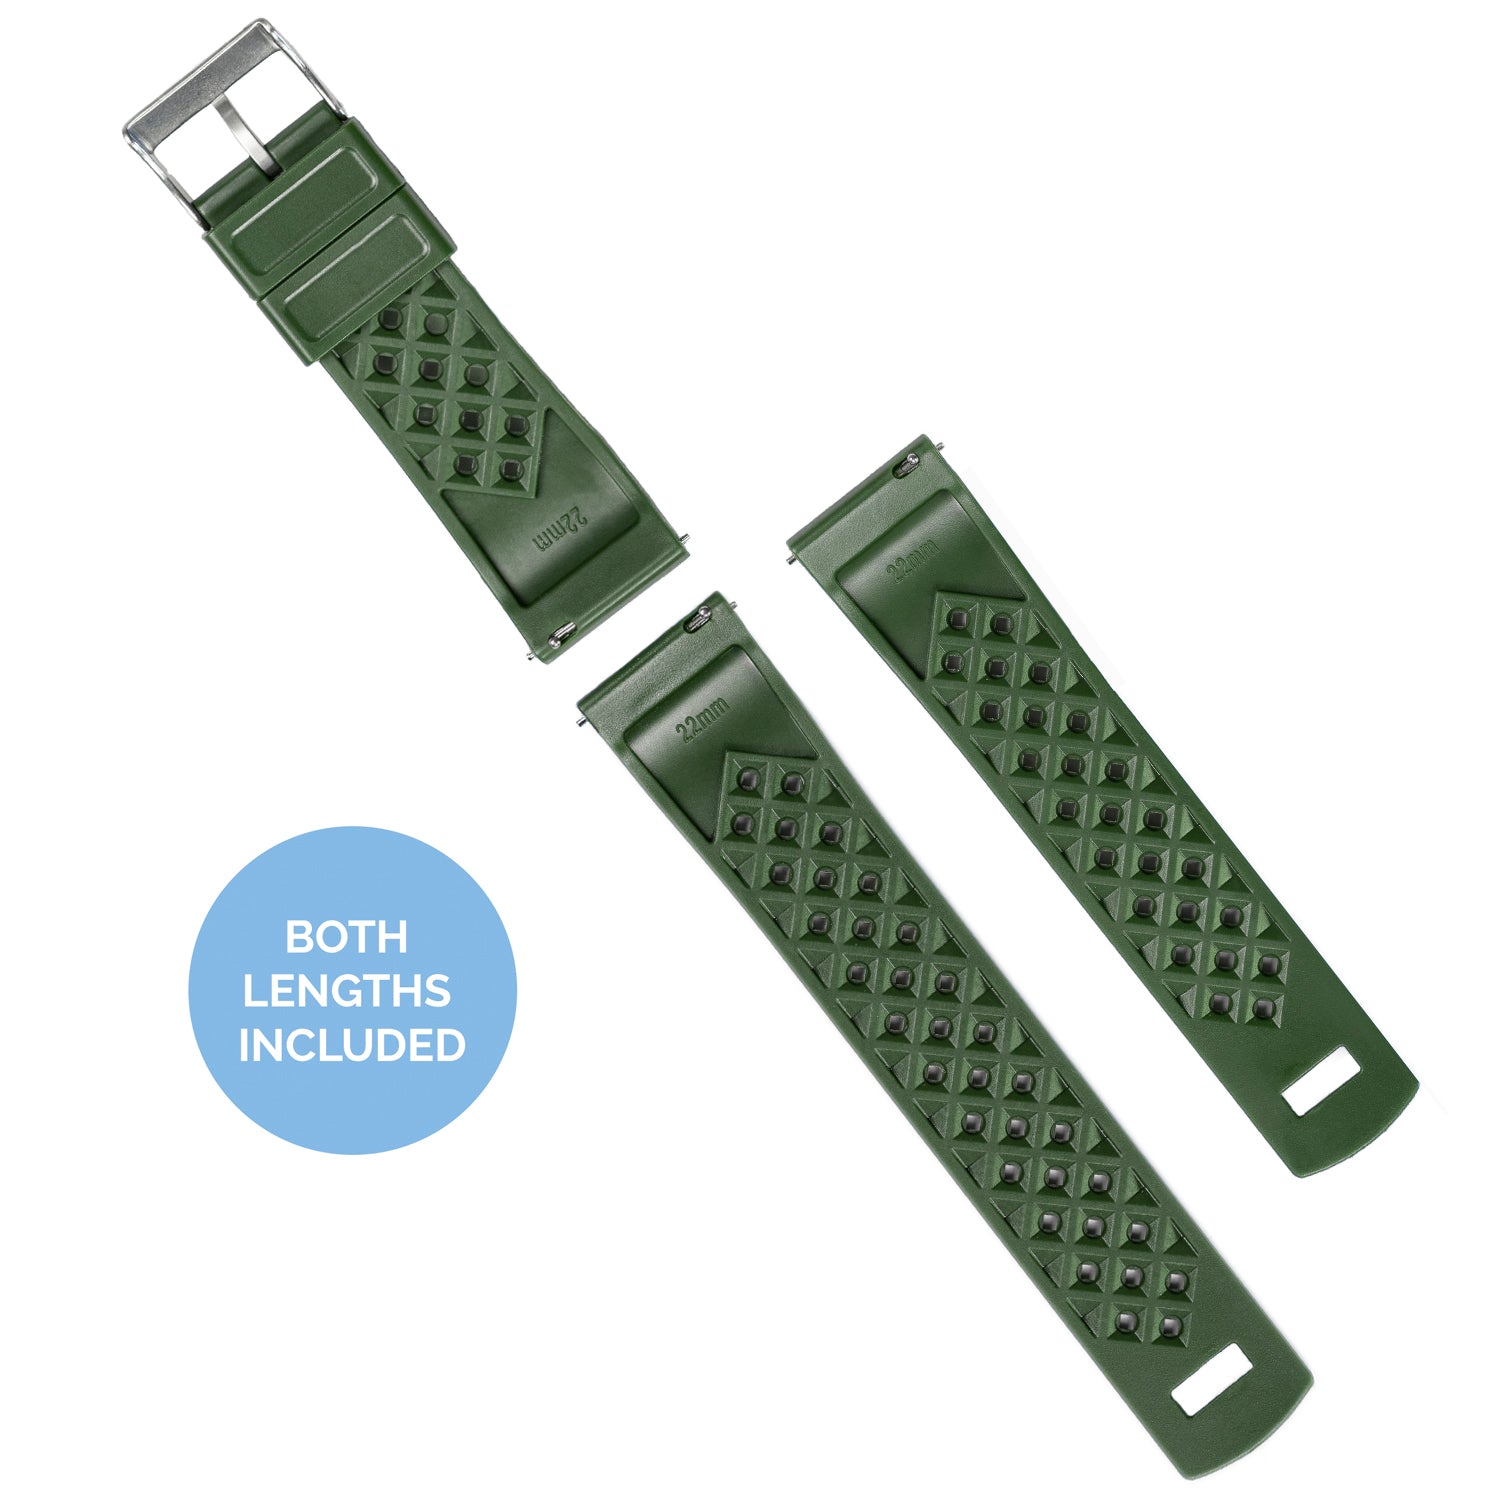 Samsung Galaxy Watch Active 2 | Tropical-Style | Army Green - Barton Watch Bands